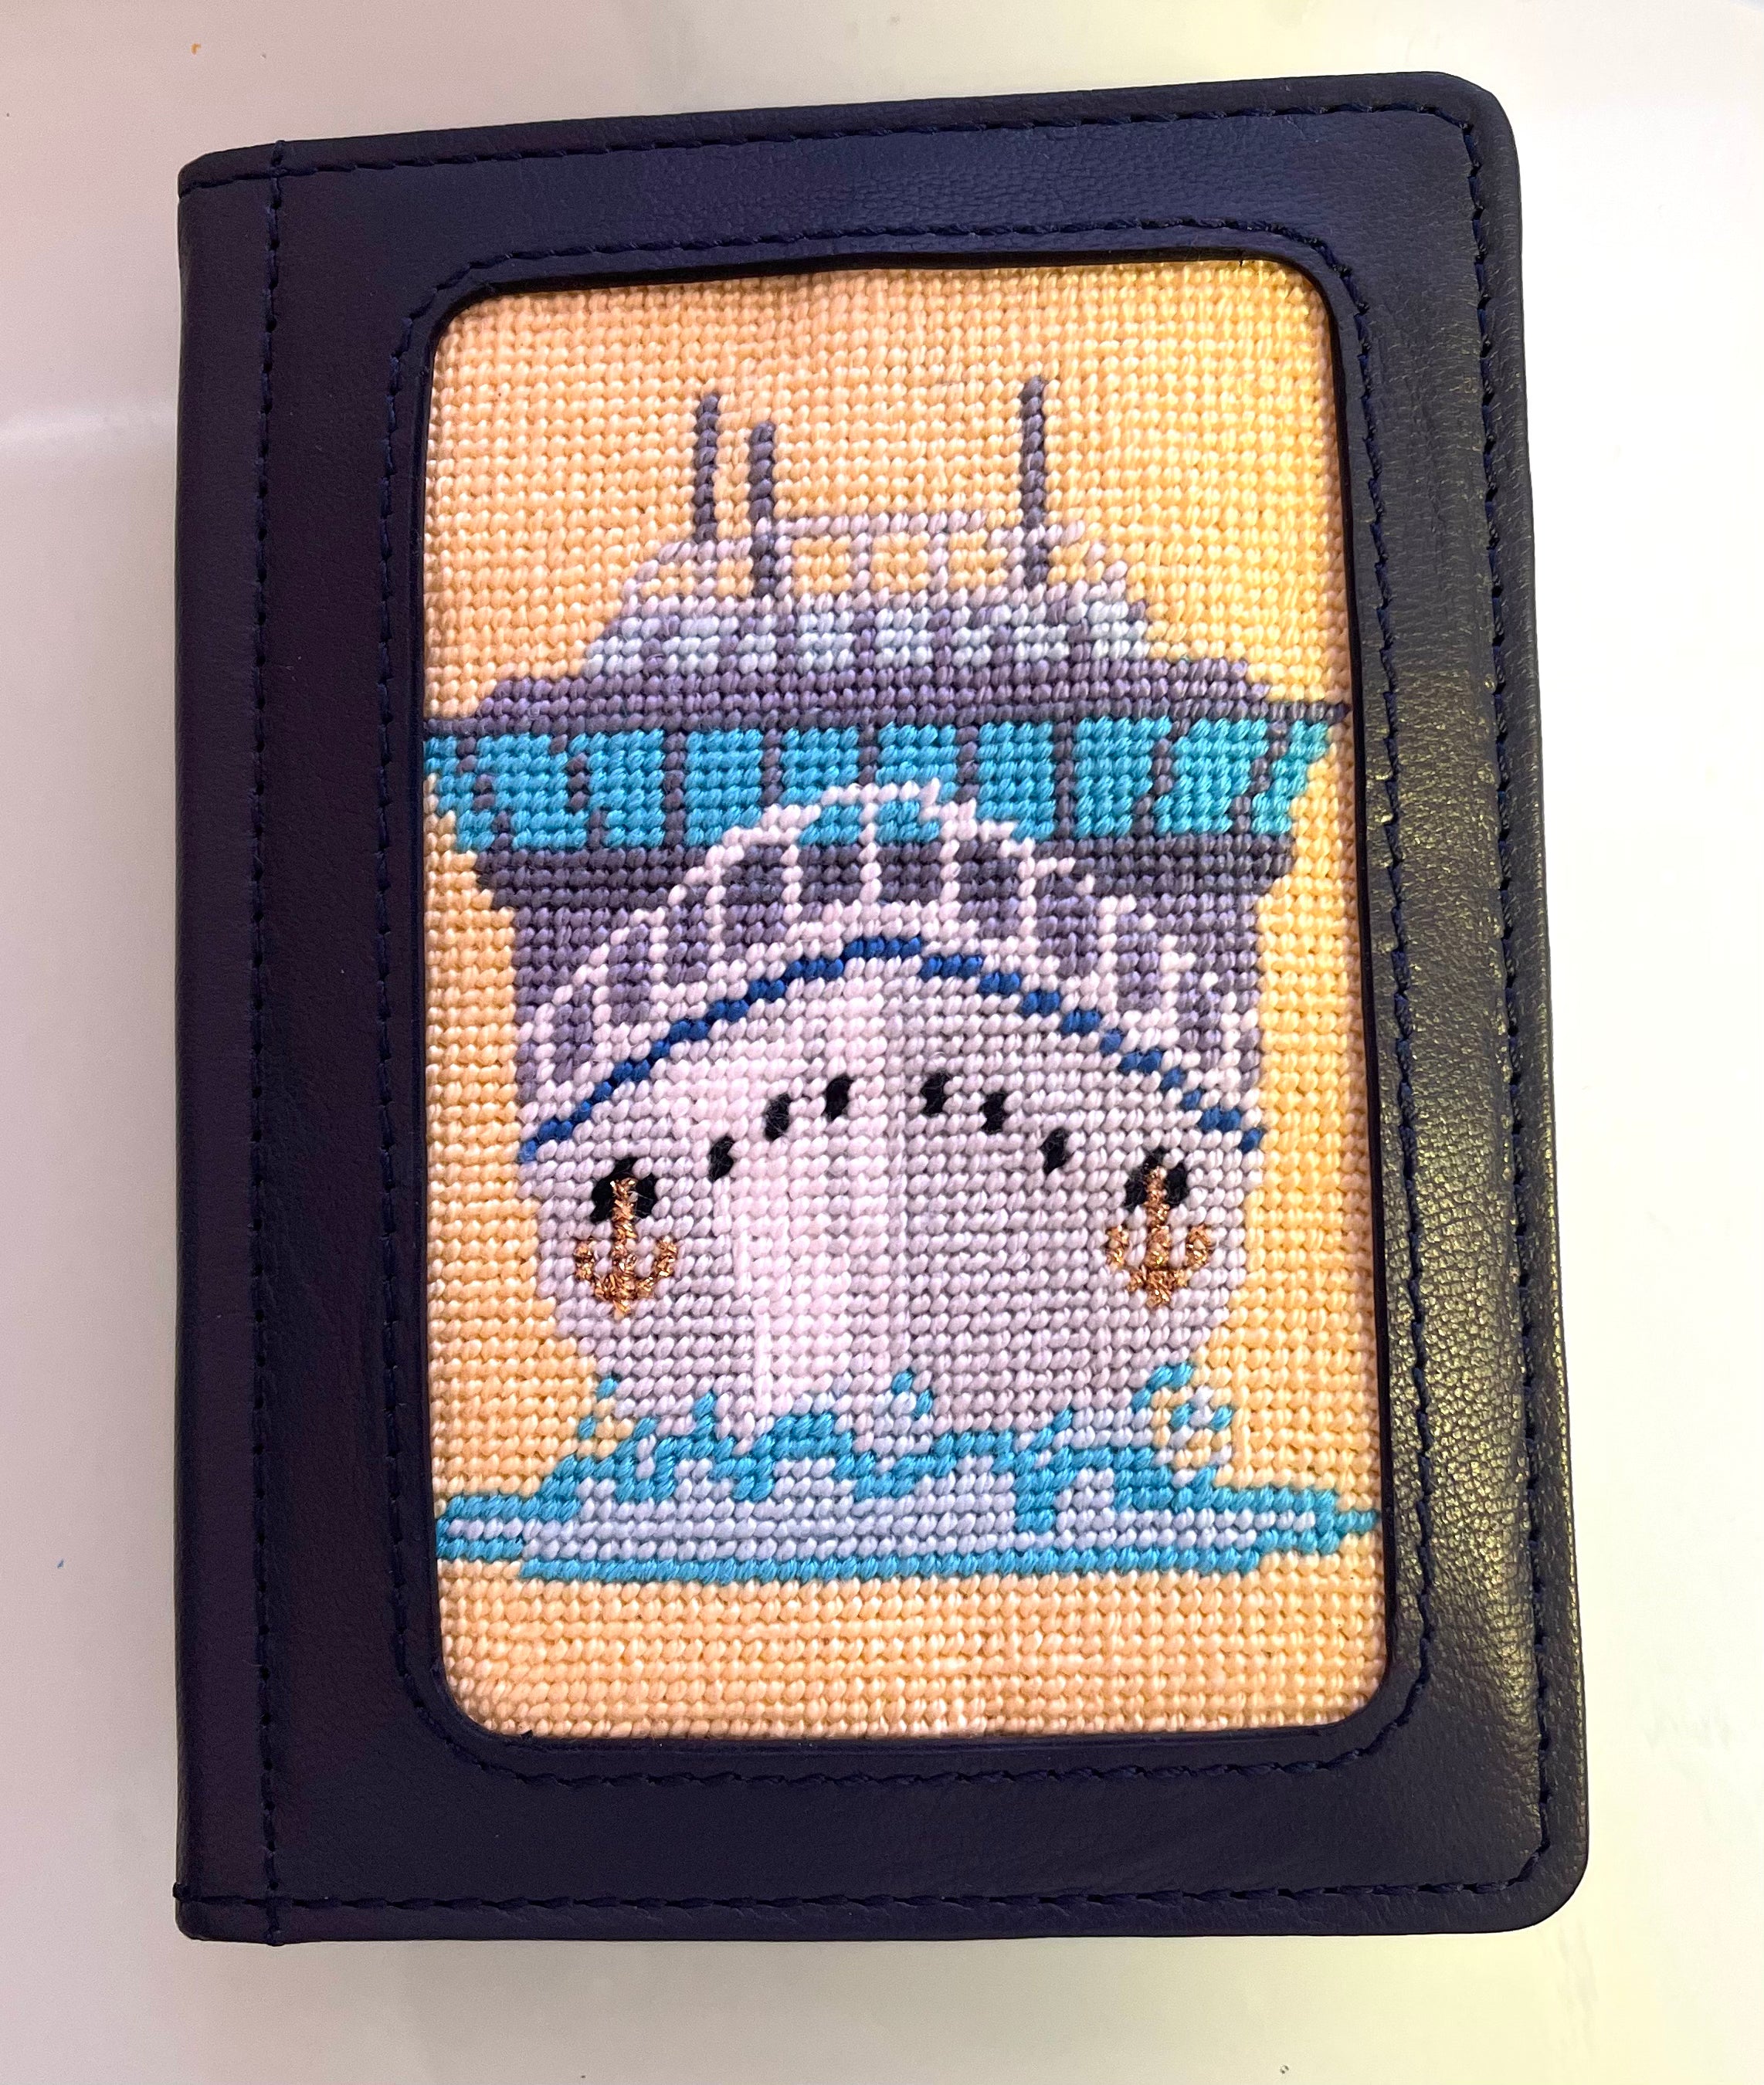 Cruise ship Passport Cover Canvas or ornament - Needlepoint by Laura